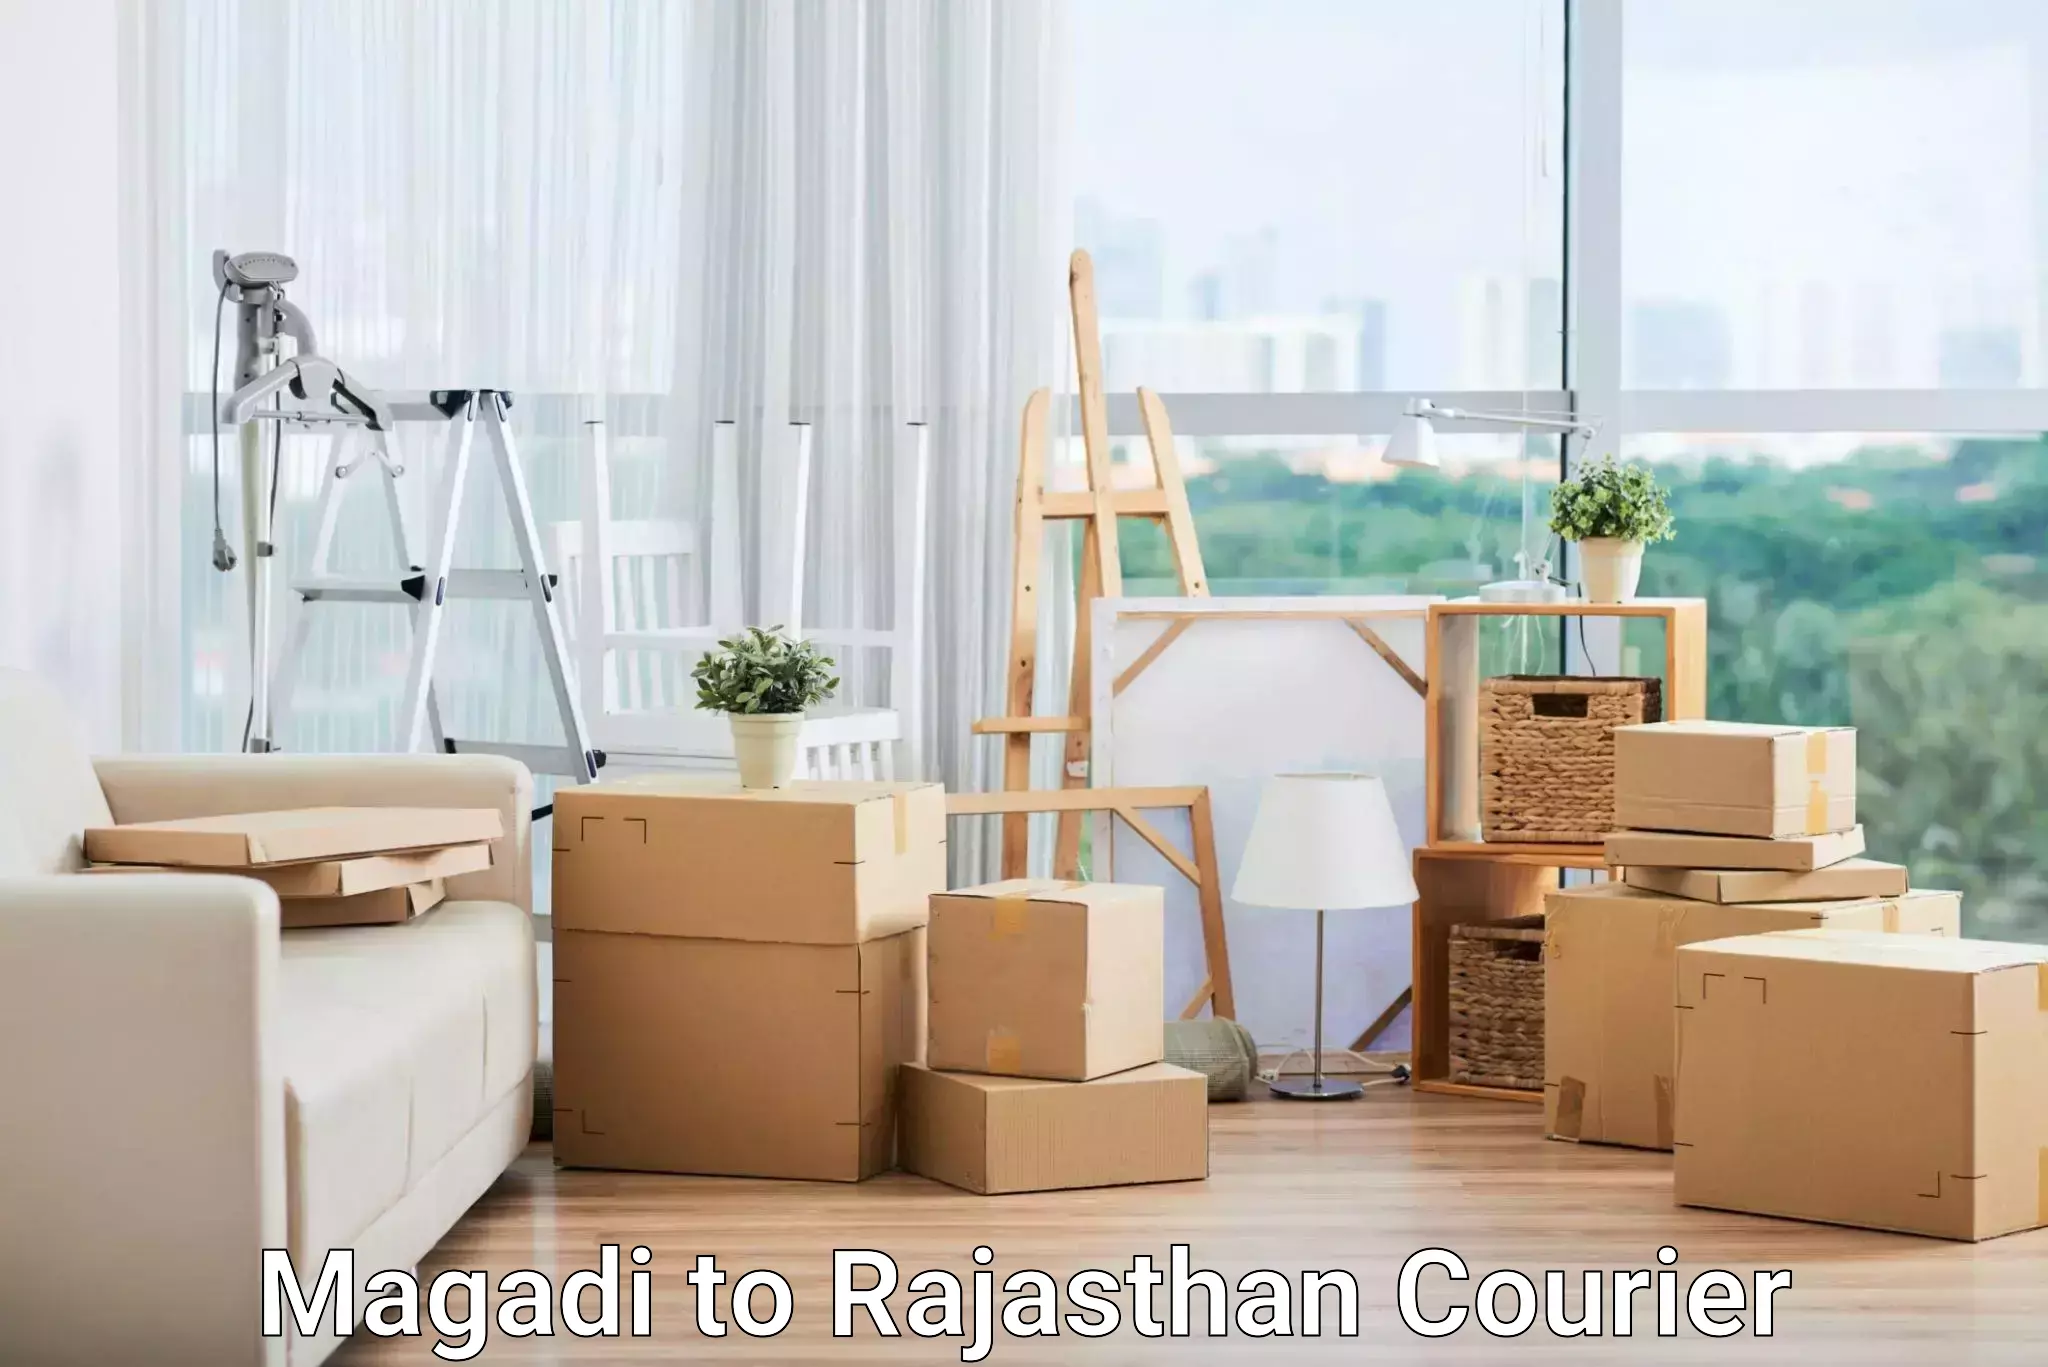 Fast delivery service Magadi to Rajasthan